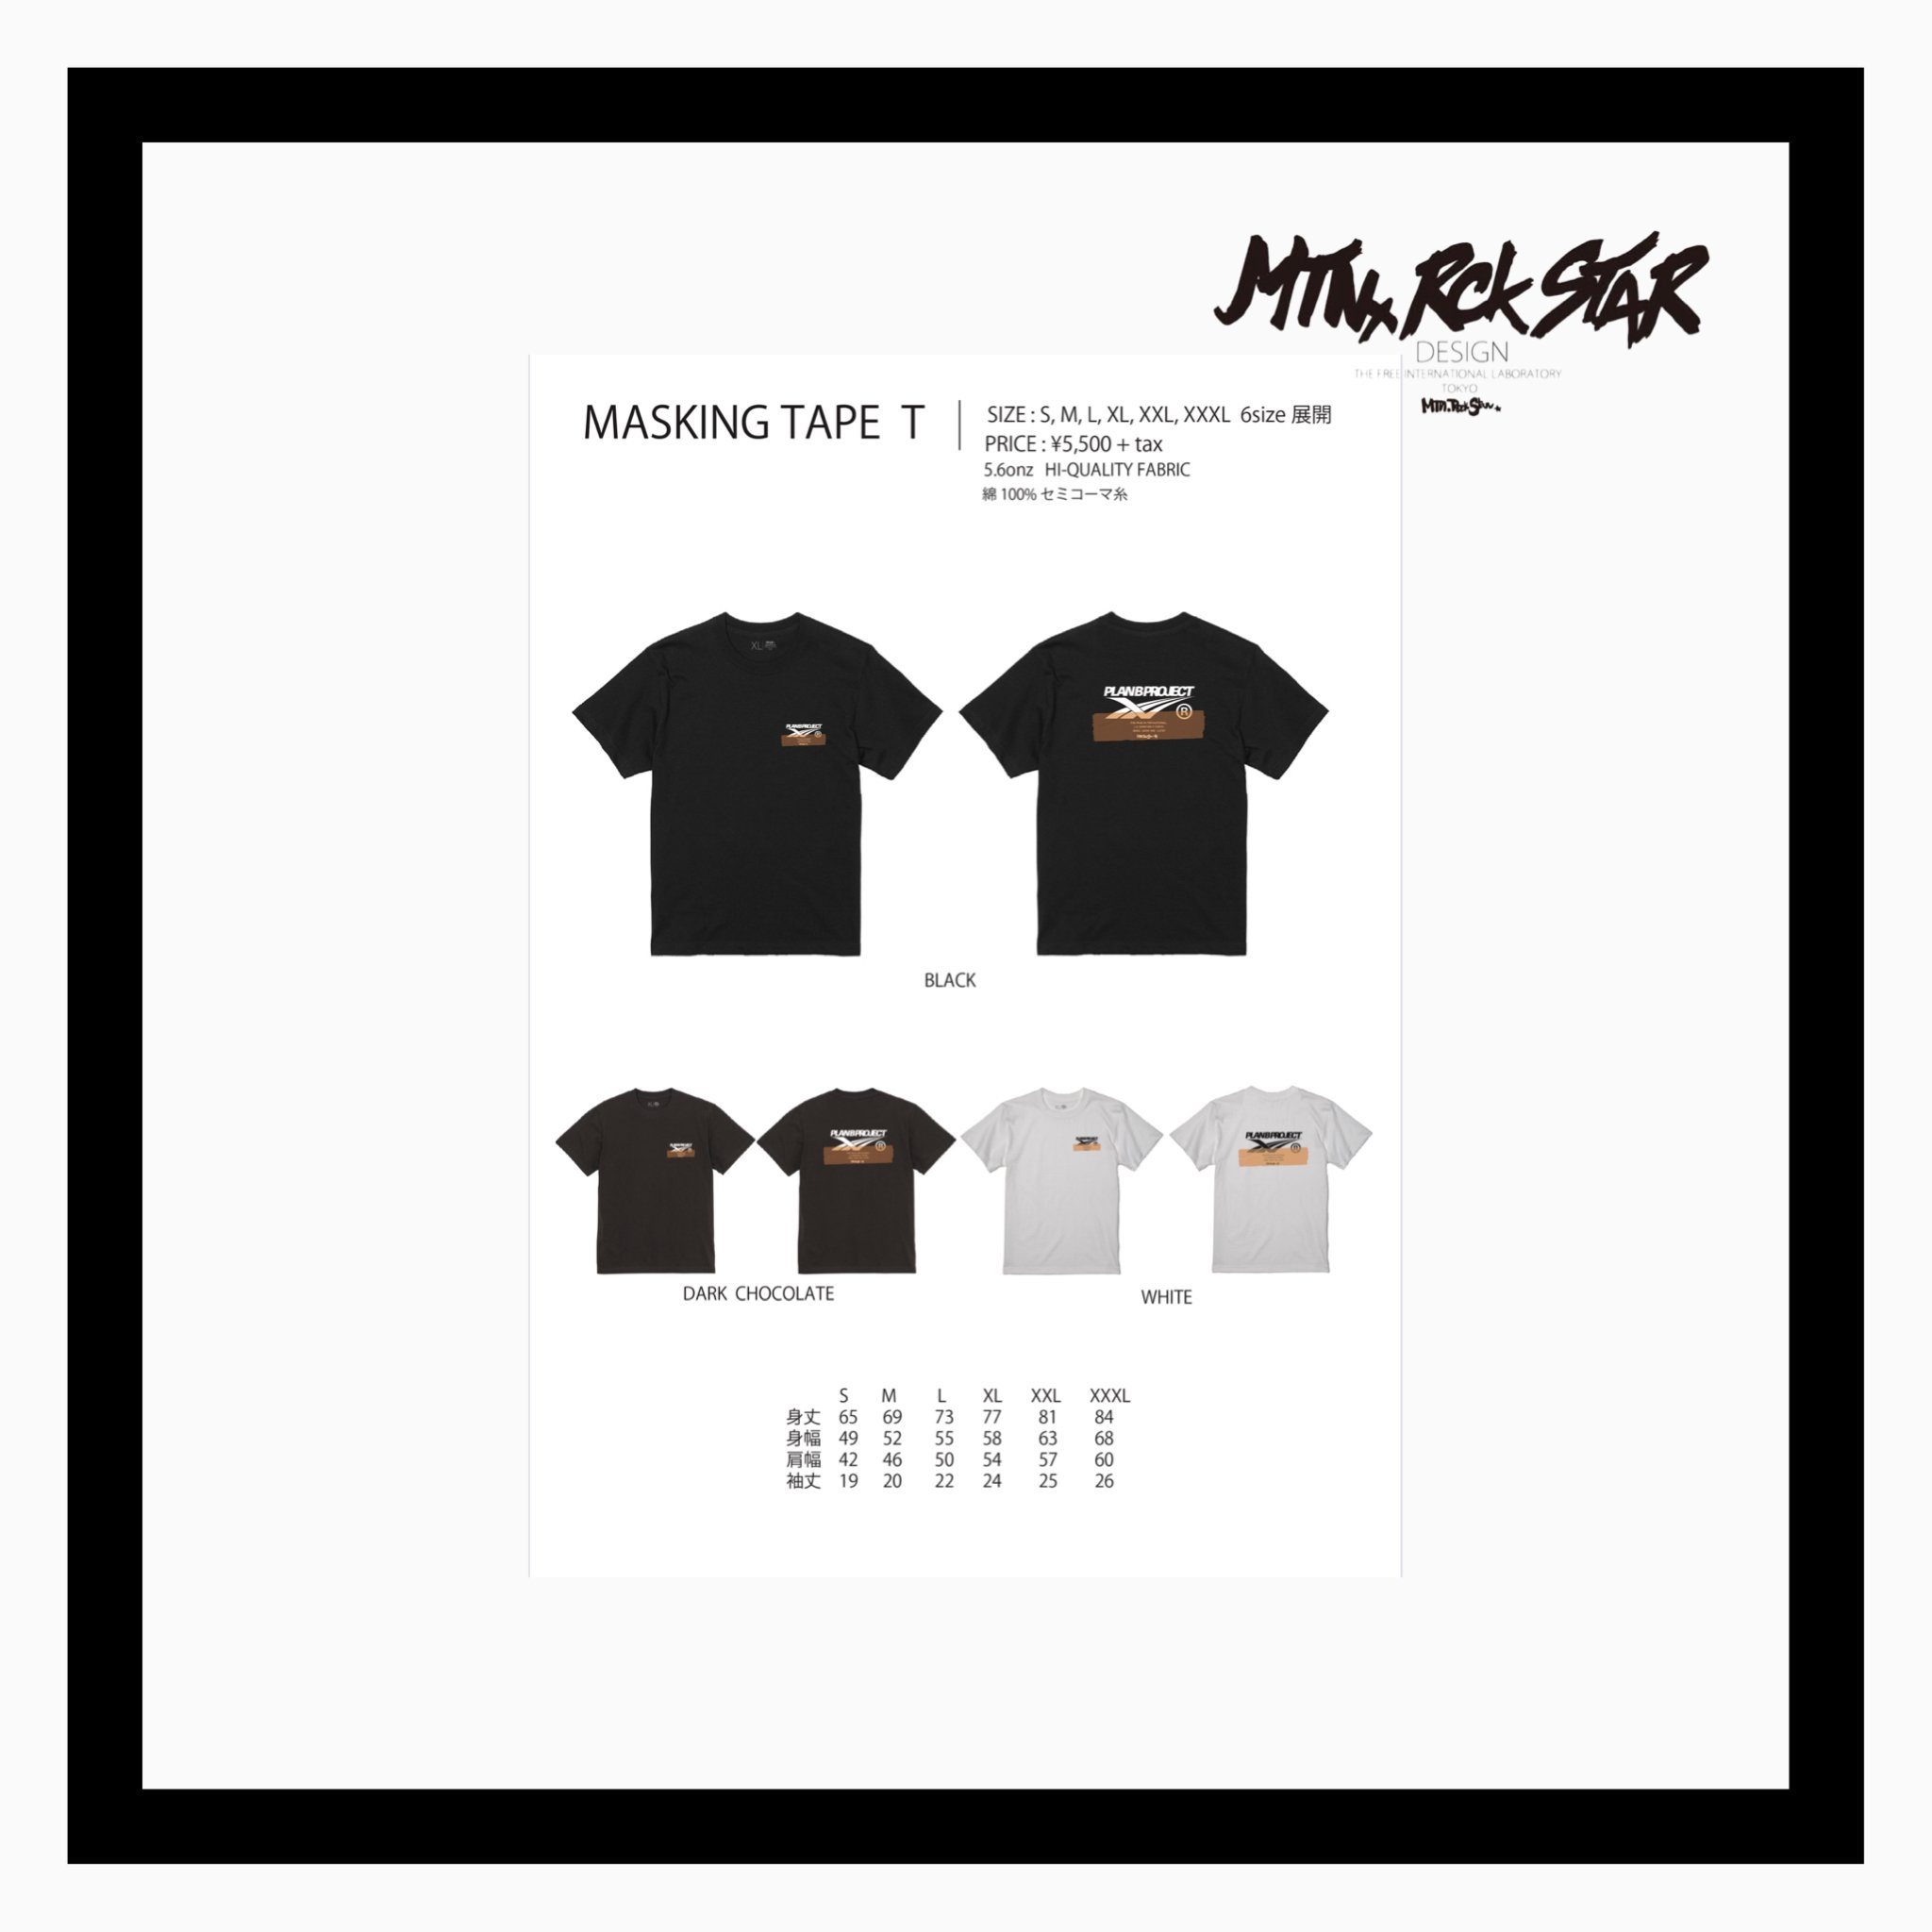 <img class='new_mark_img1' src='https://img.shop-pro.jp/img/new/icons14.gif' style='border:none;display:inline;margin:0px;padding:0px;width:auto;' />MOUNTAIN ROCK STAR SUMMER Apparel MASKING TAPE T